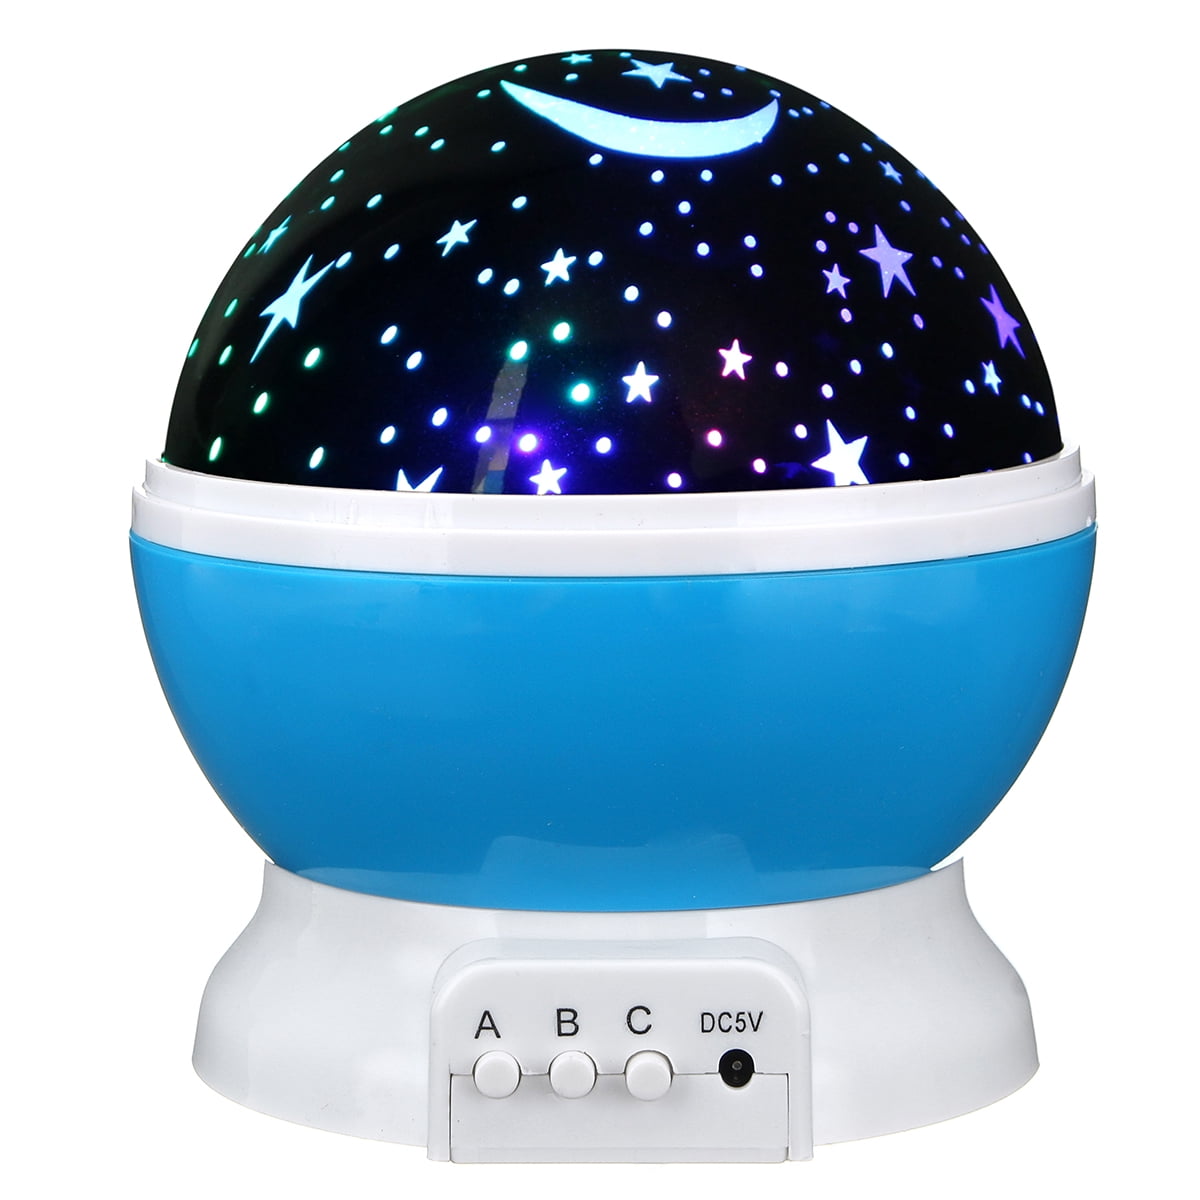 Details about   Baby Kids Lamp Moon Star Sky Projector Rotating Cosmos Constellation Night Light 